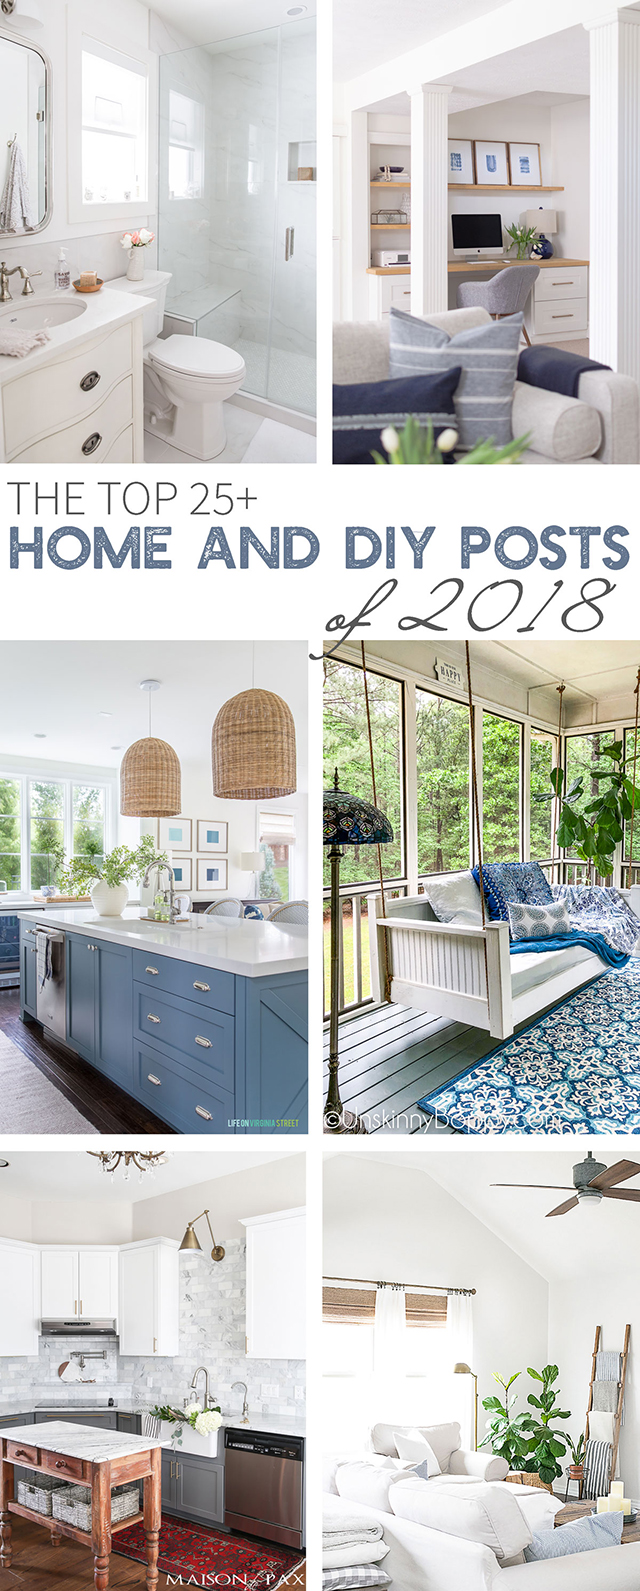 The Best of 2018 from livelaughrowe.com PLUS 20+ other fabulous Home and DIY posts to inspire you!